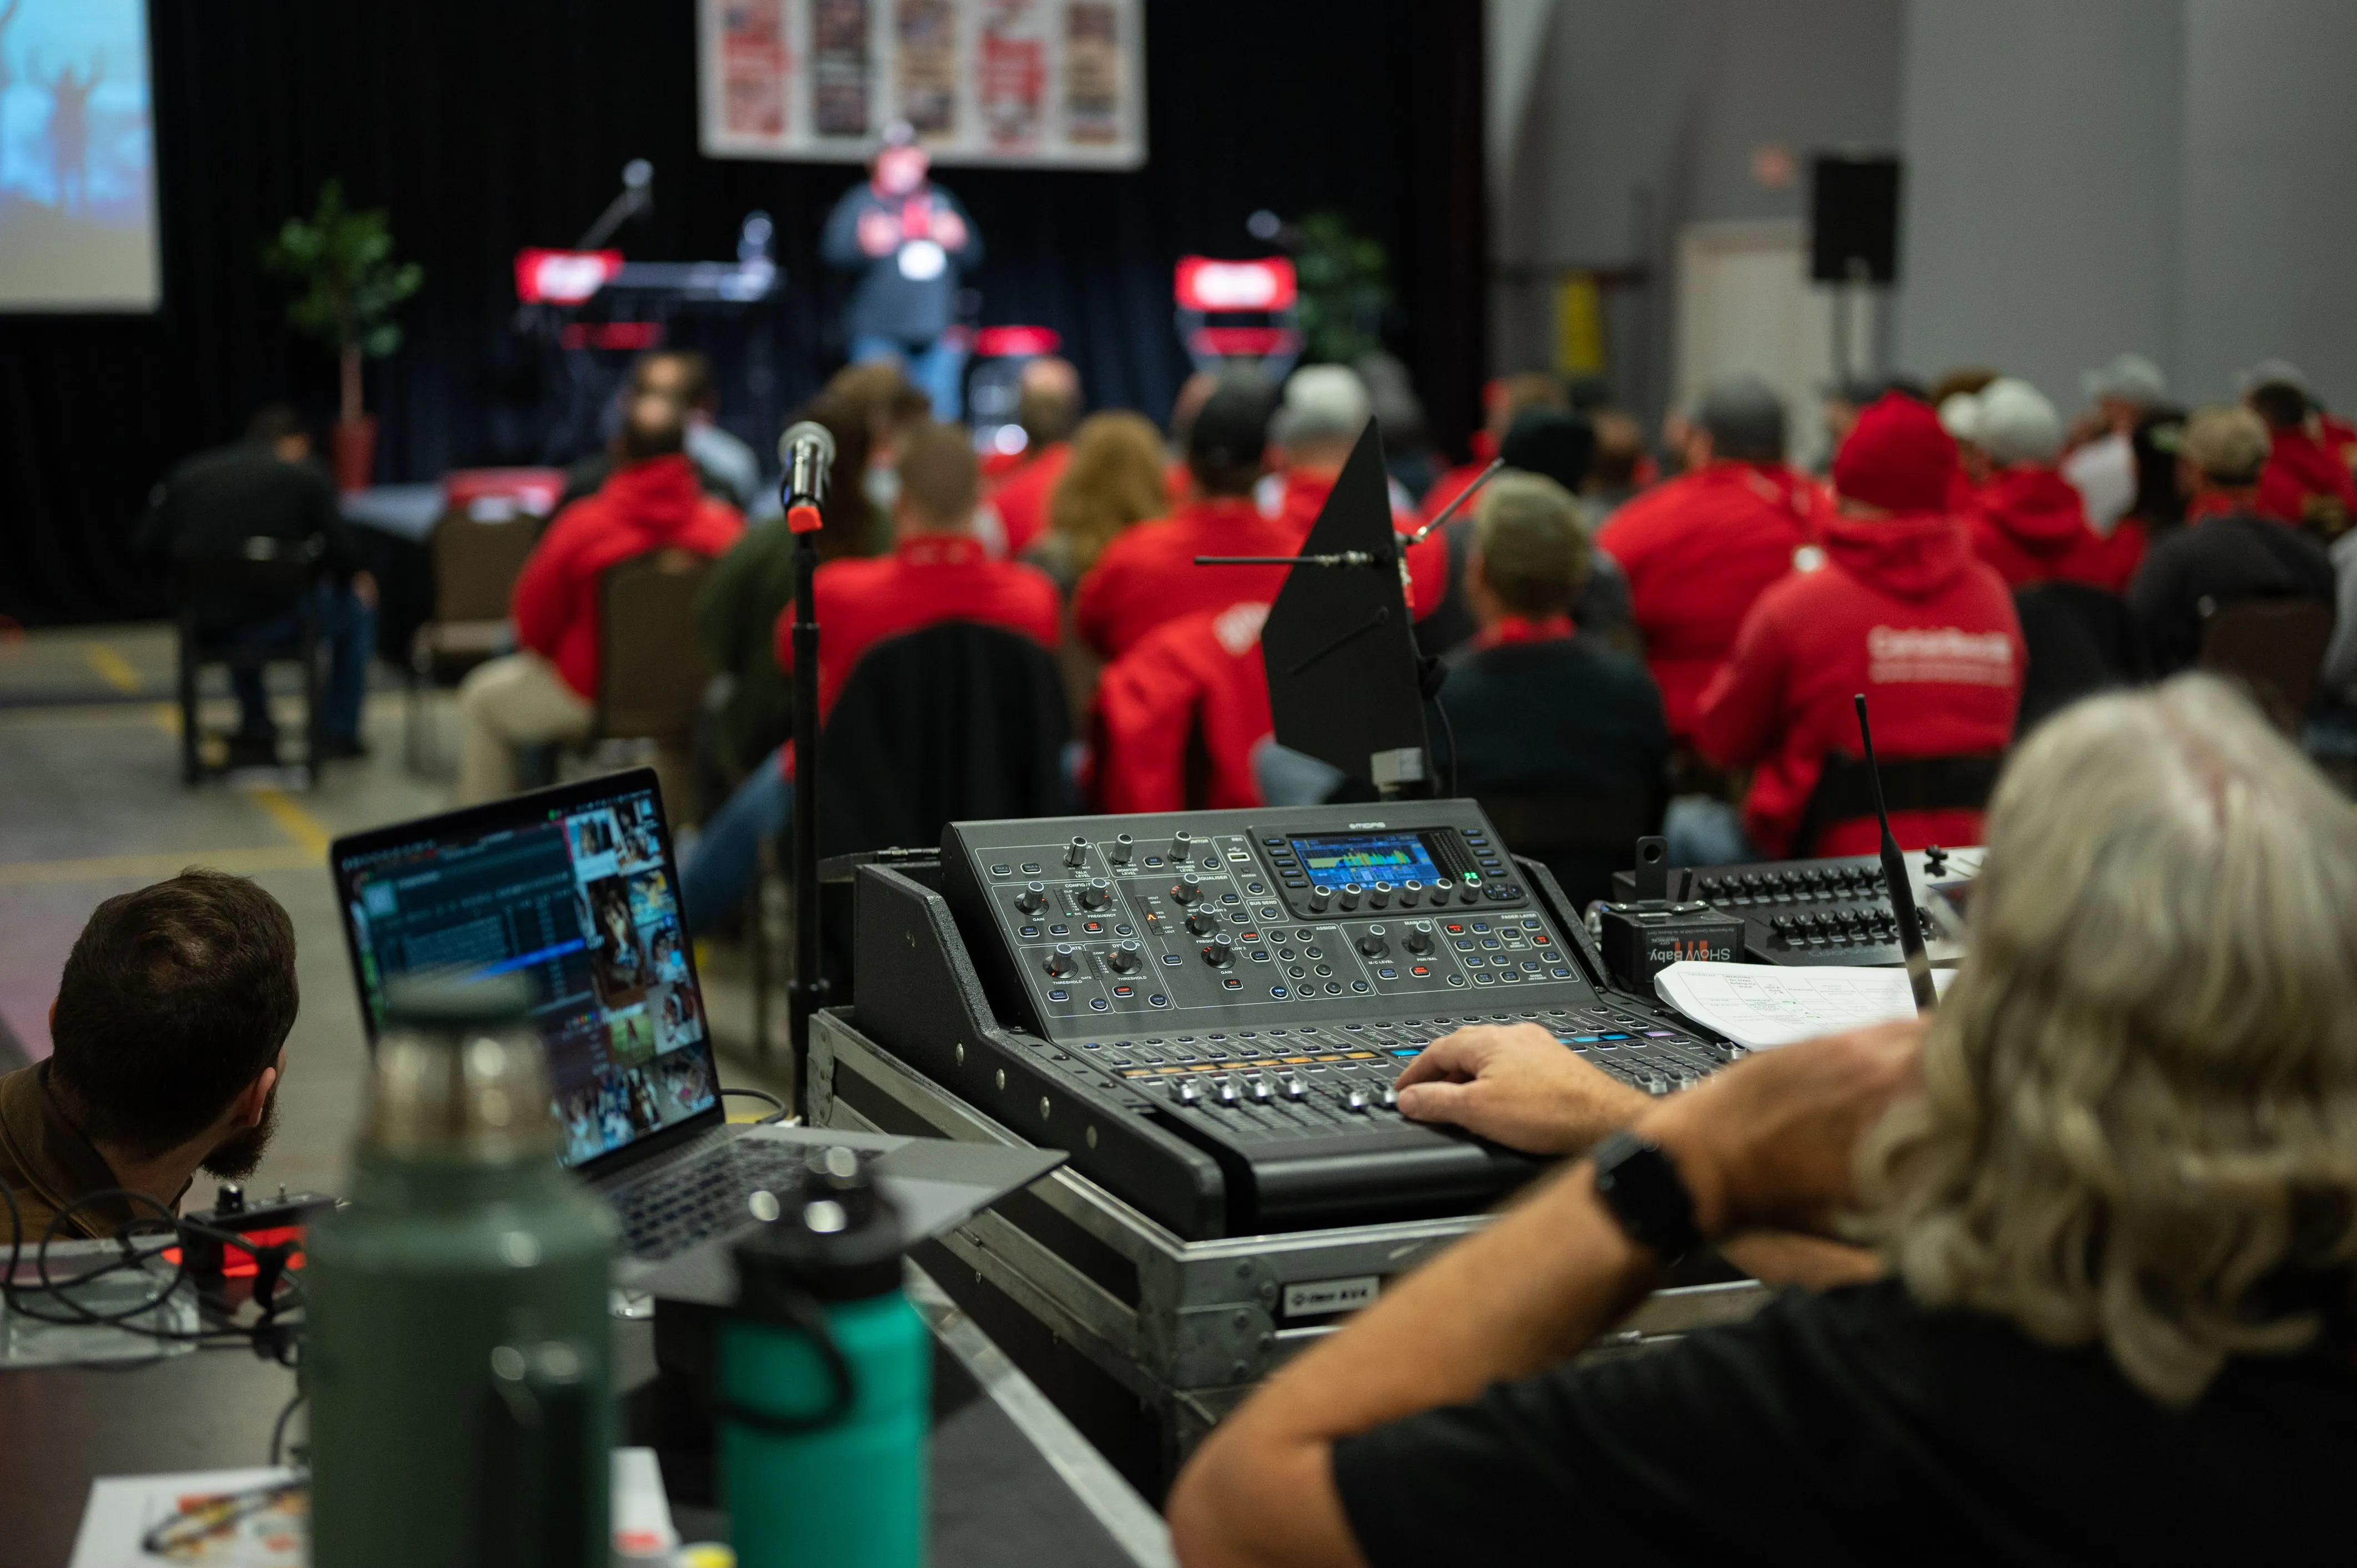 Audience in red shirts at a conference with a presenter in the background, foreground shows person operating an audio mixing console.